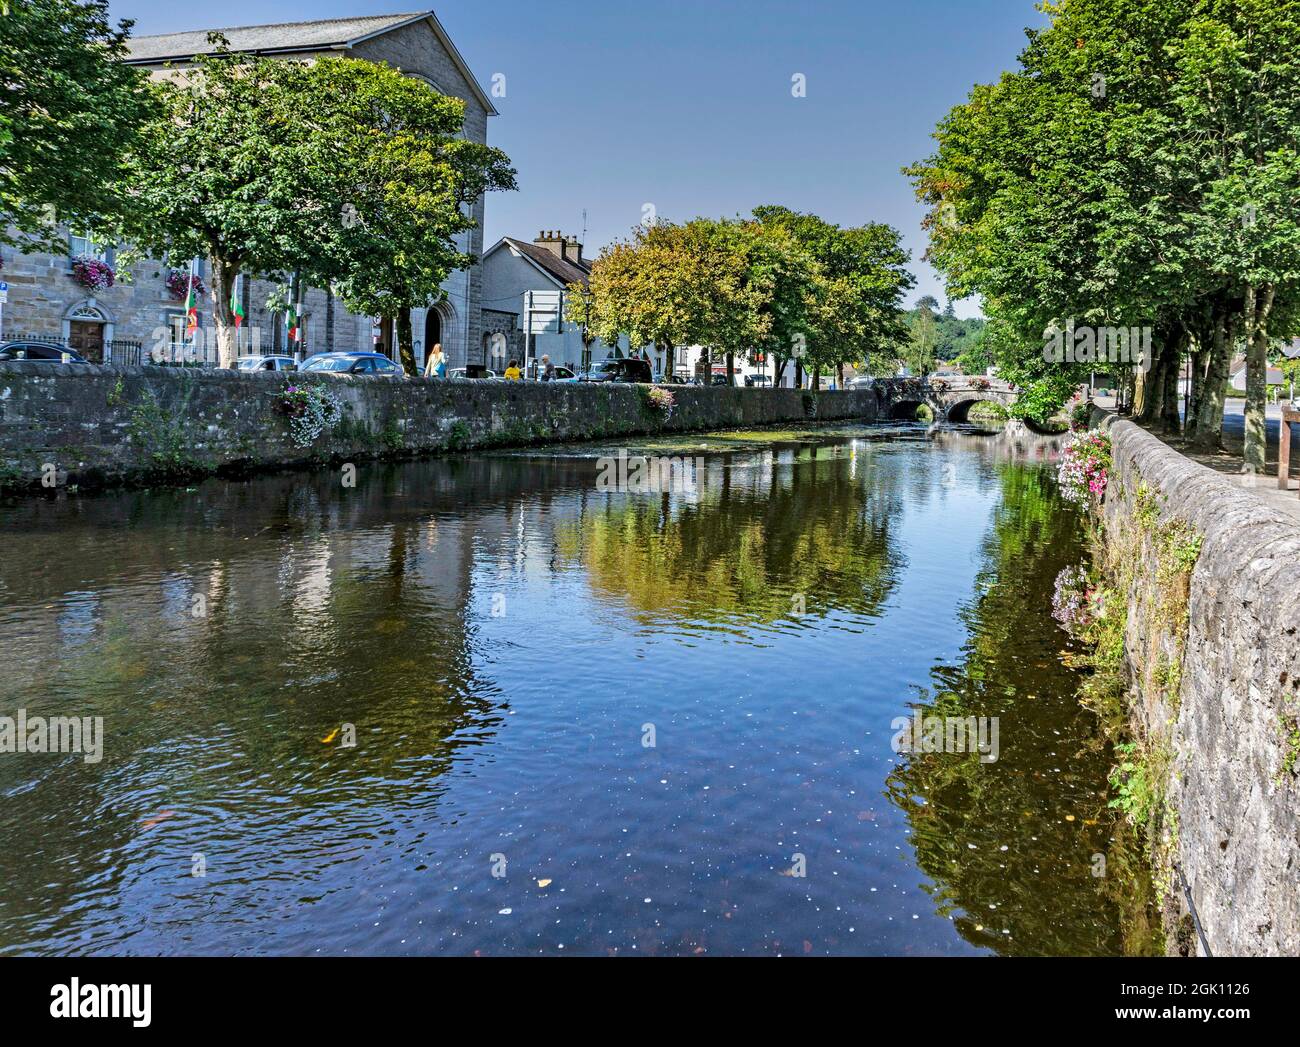 The Carrowbeg River flowing through the town of Westport, County Mayo., Ireland. Stock Photo